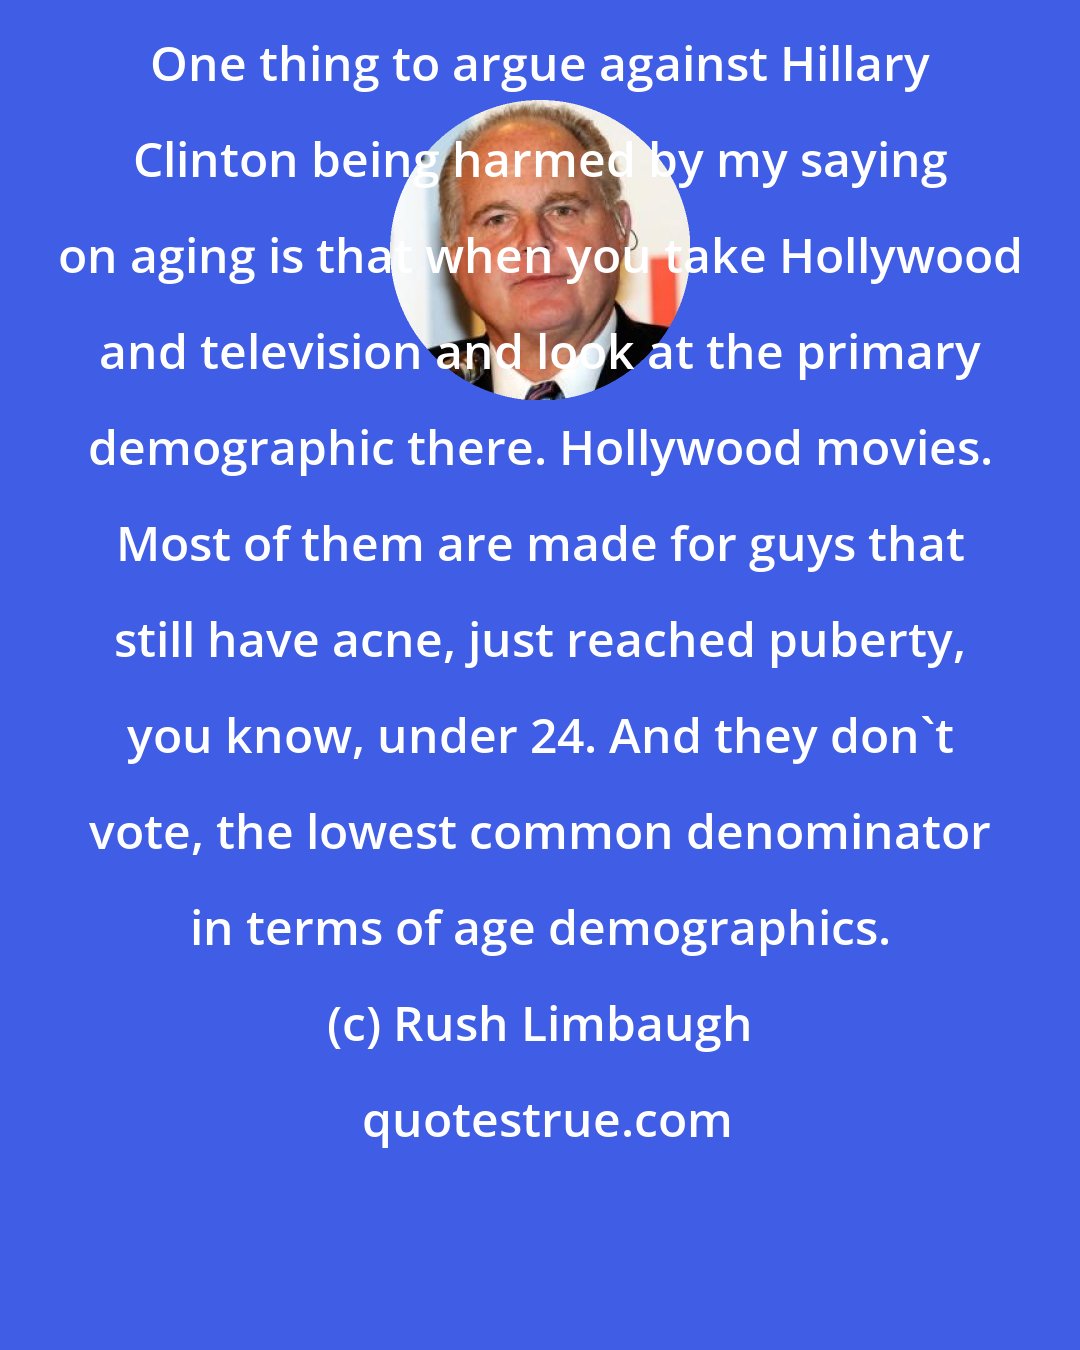 Rush Limbaugh: One thing to argue against Hillary Clinton being harmed by my saying on aging is that when you take Hollywood and television and look at the primary demographic there. Hollywood movies. Most of them are made for guys that still have acne, just reached puberty, you know, under 24. And they don't vote, the lowest common denominator in terms of age demographics.